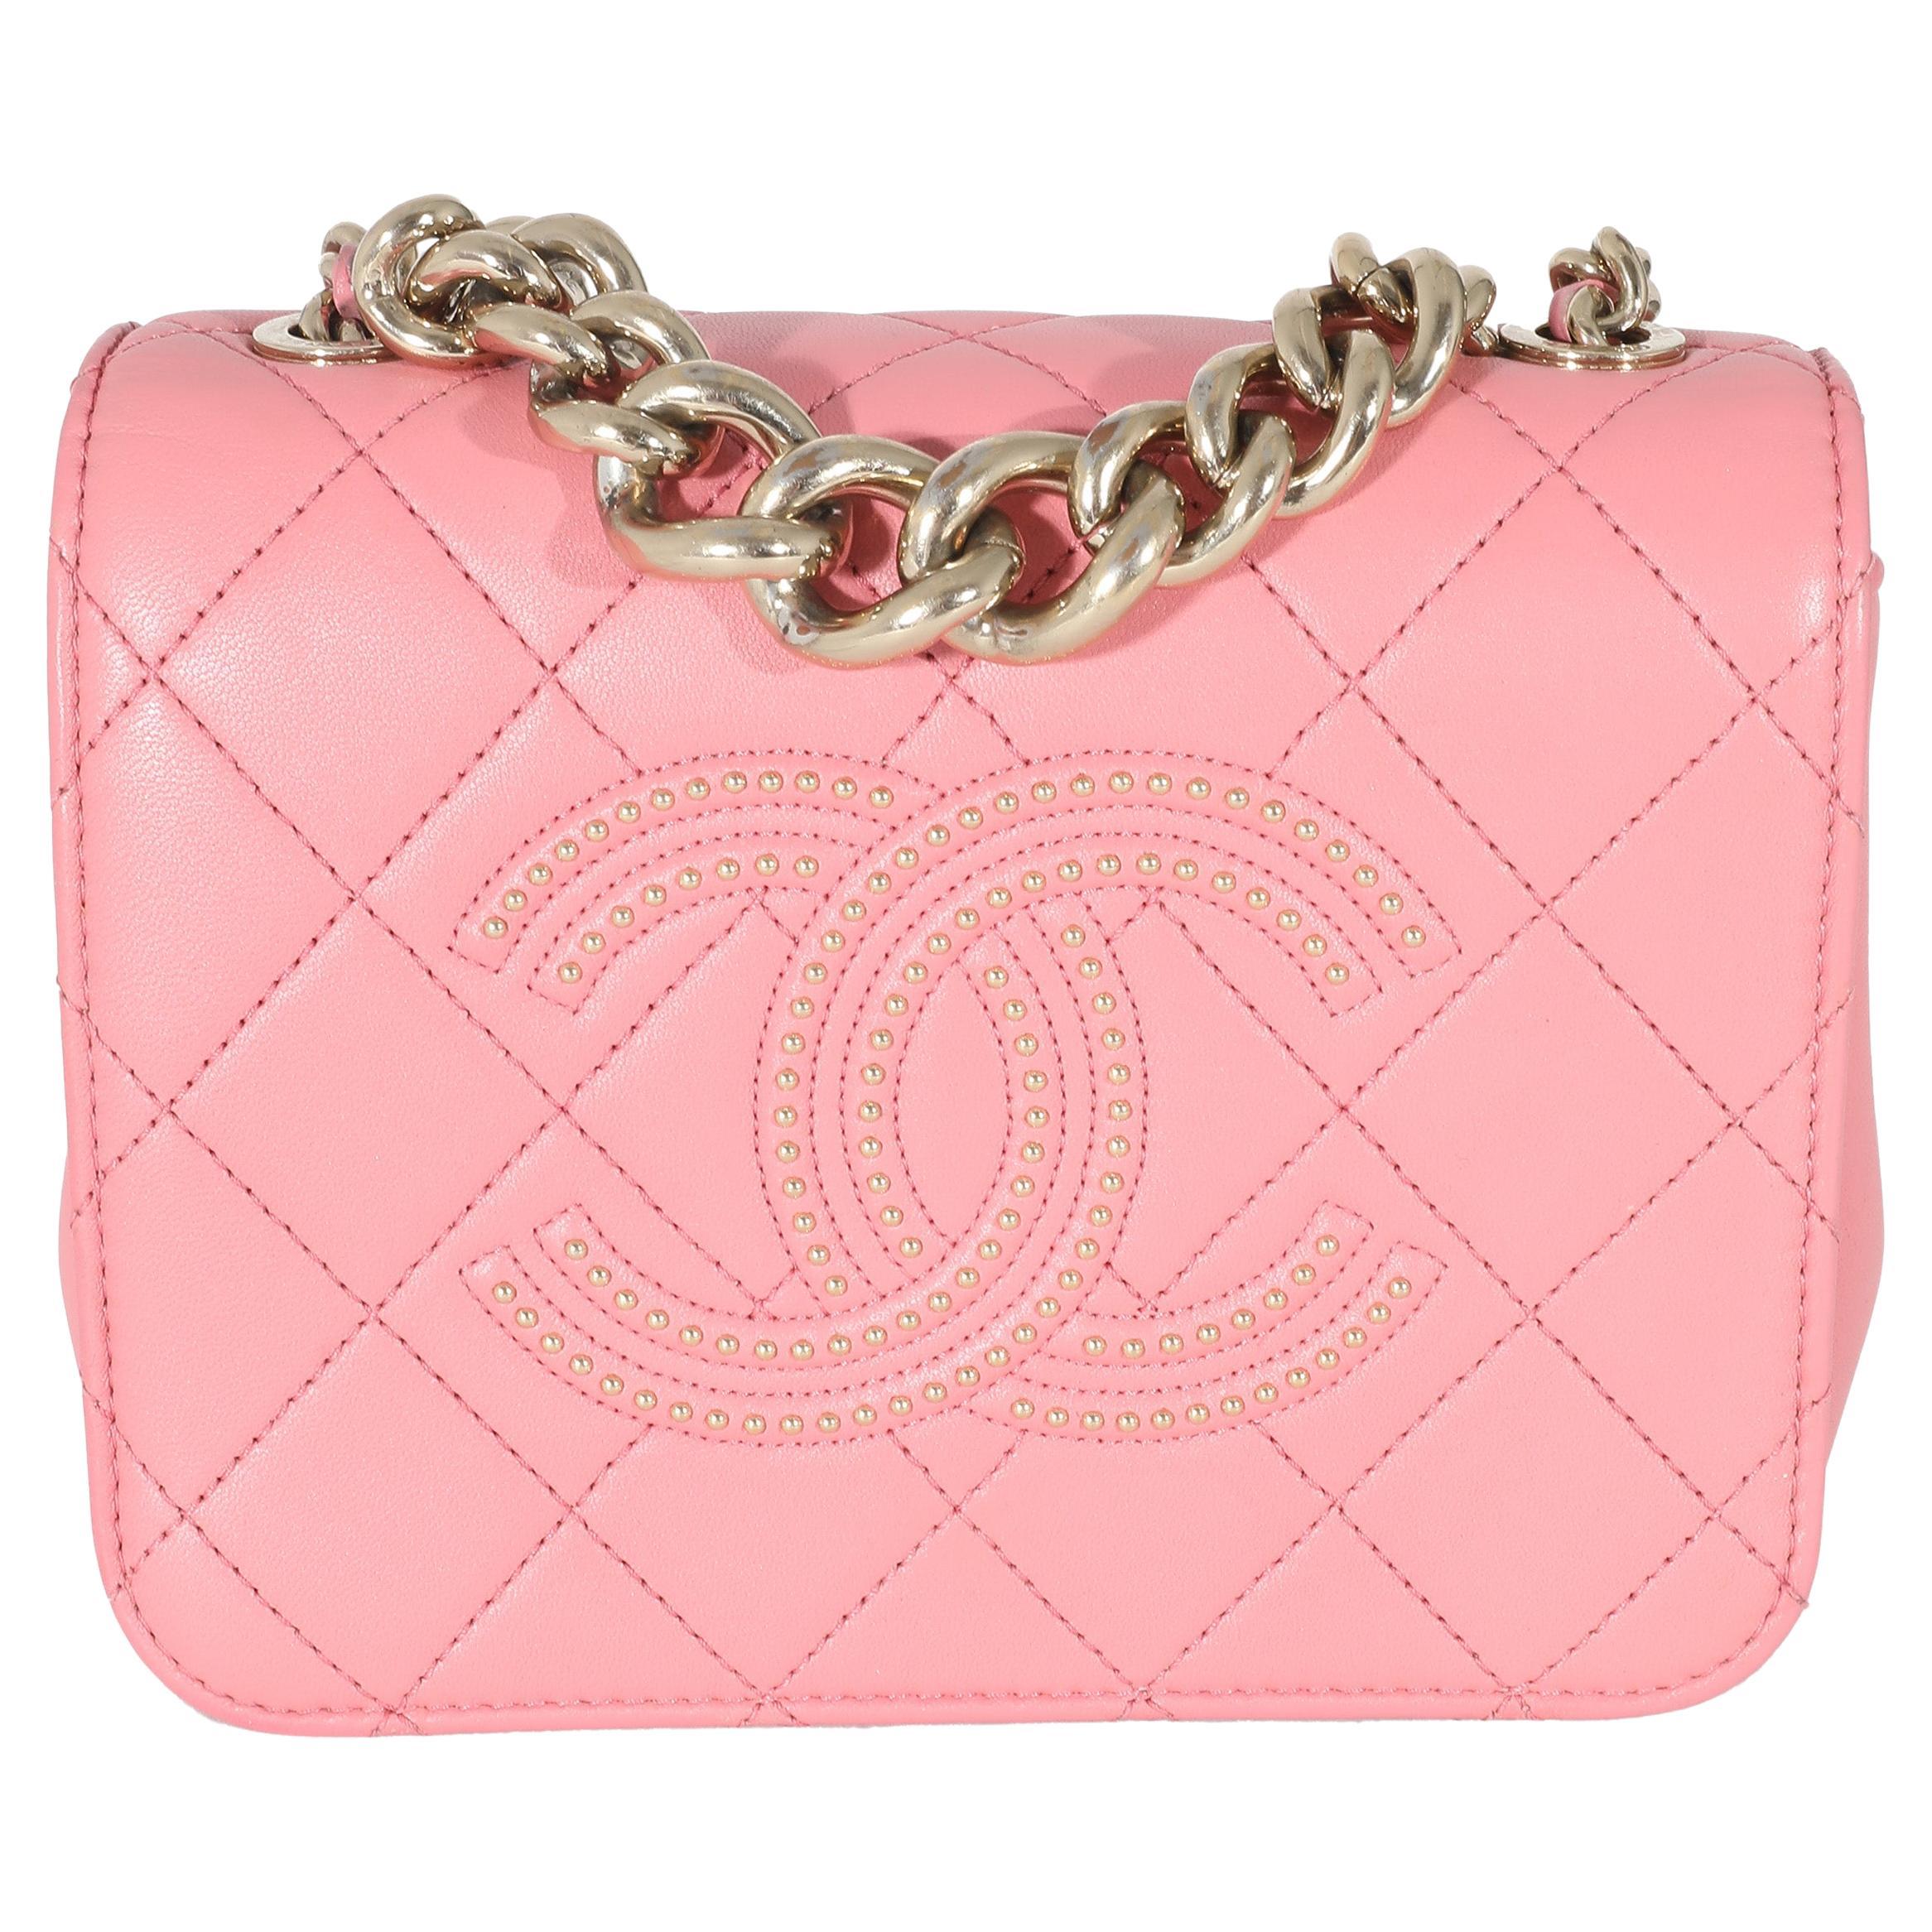 Chanel Pink Quilted Calfskin Beauty Begins Flap Bag For Sale